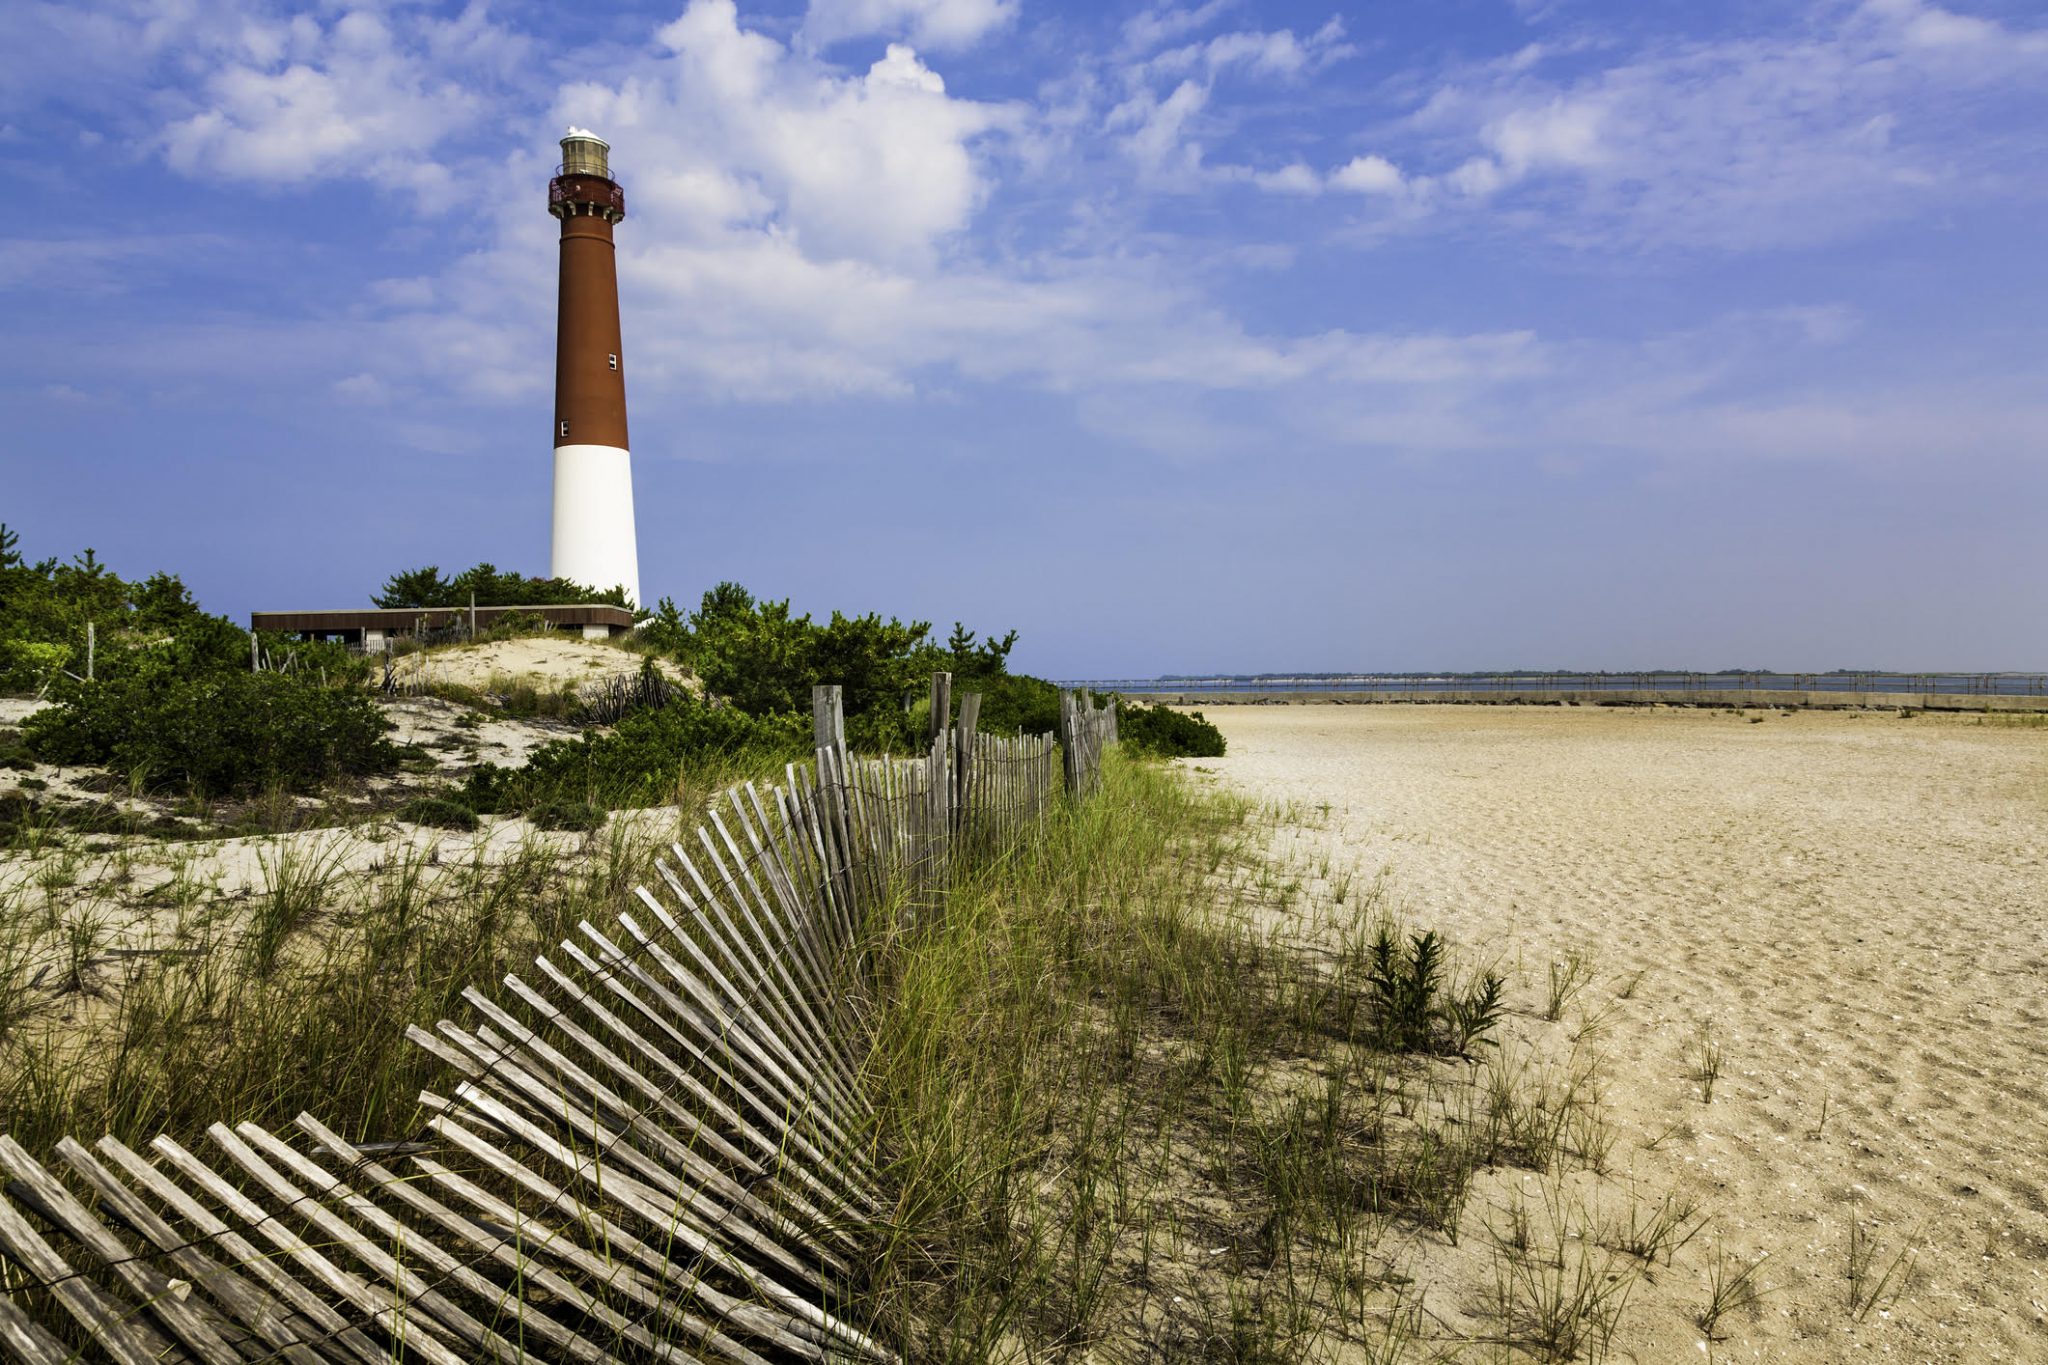 Introducing the 5 Best State Parks in NJ VUE magazine